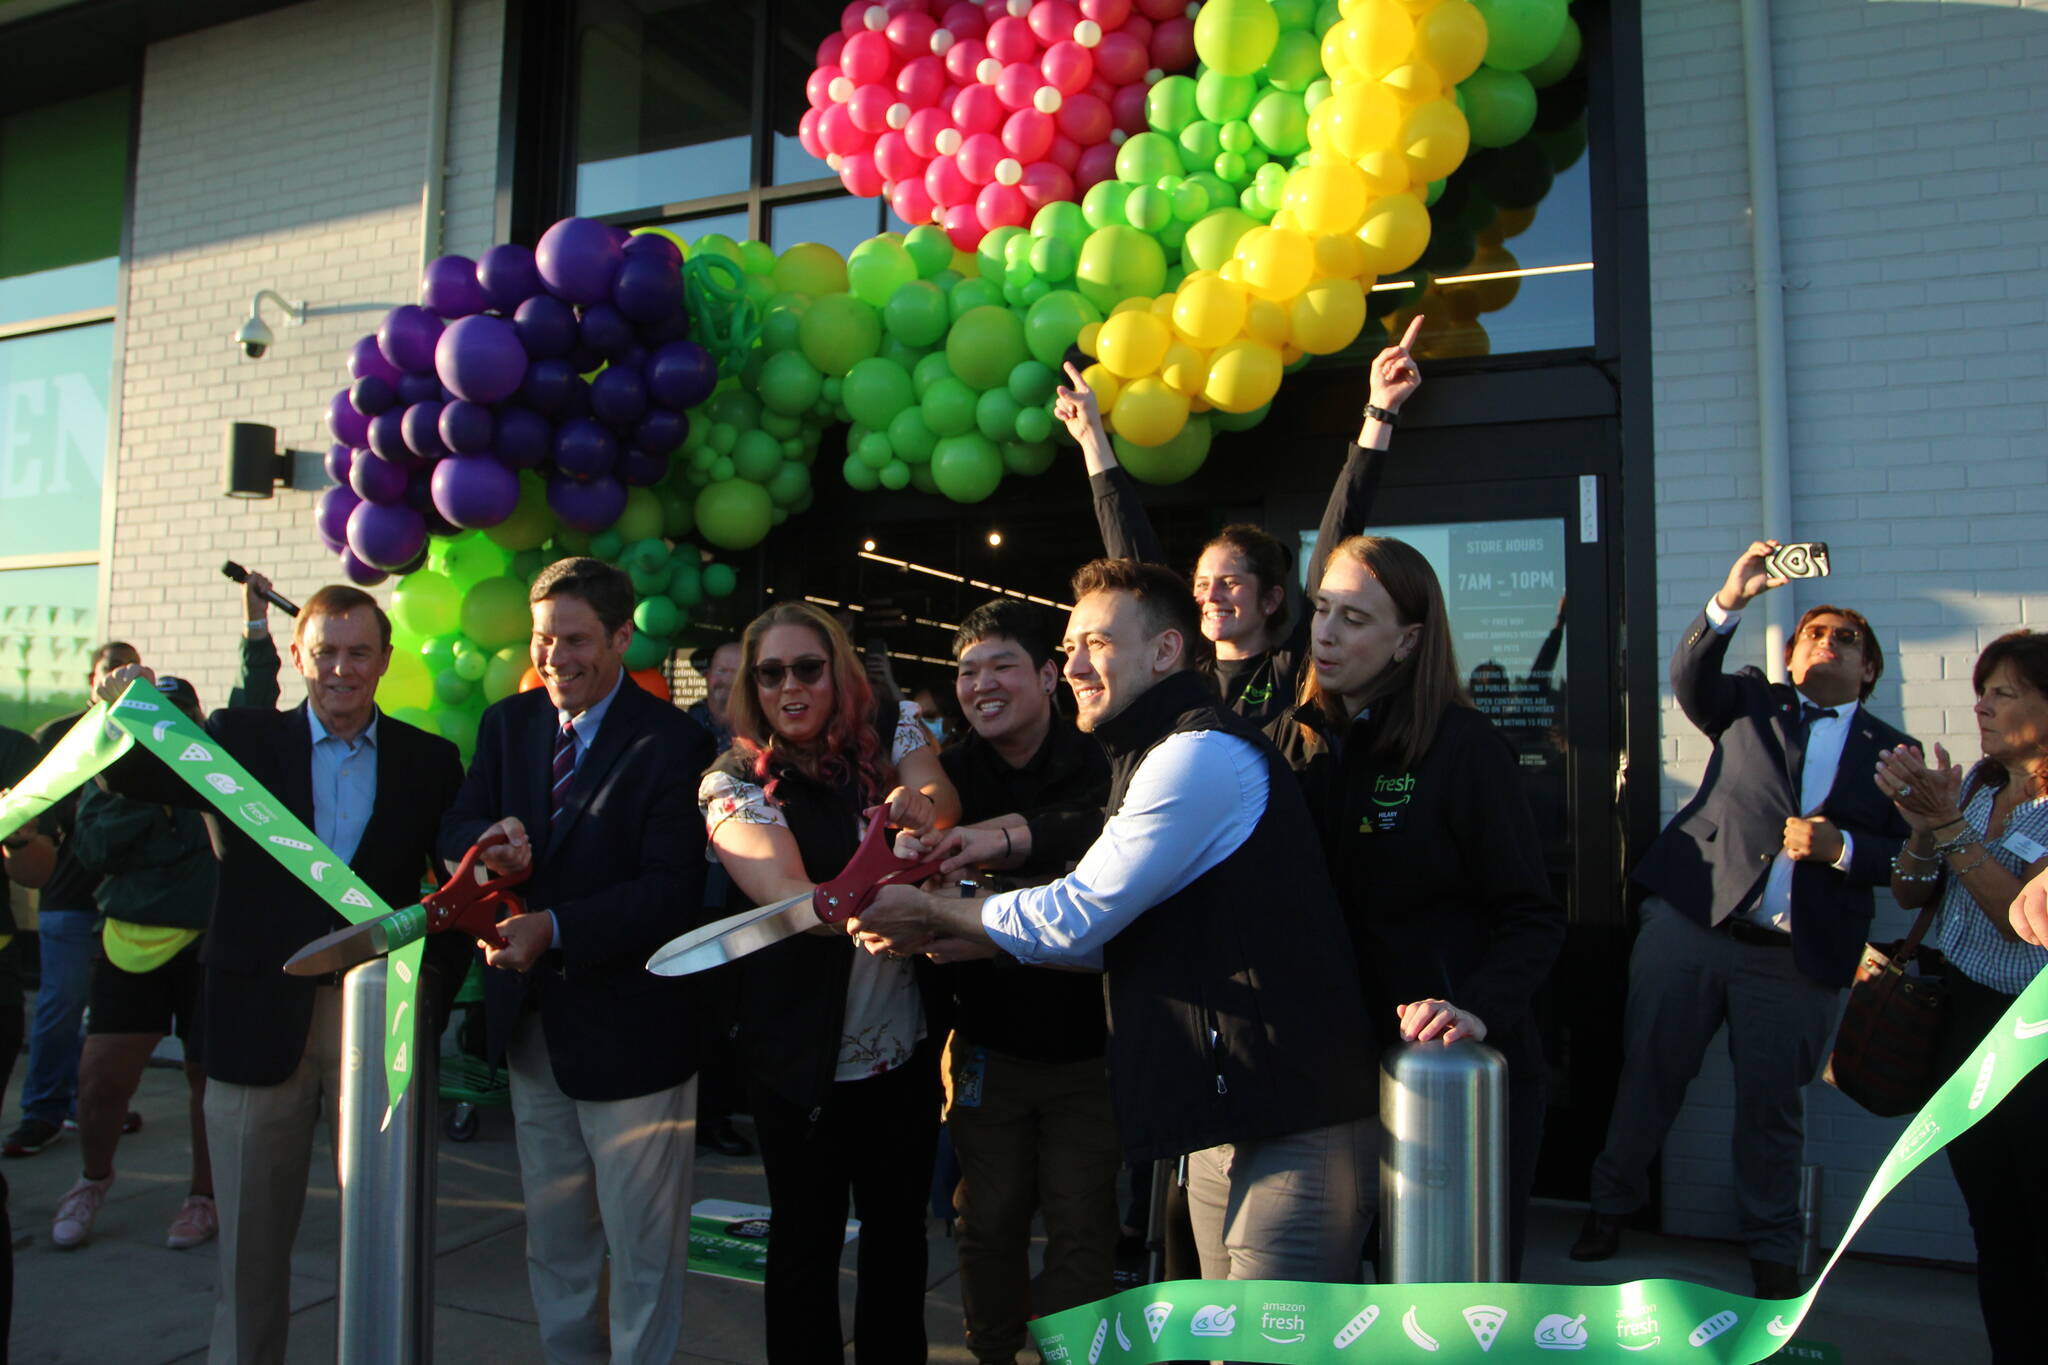 City officials and Amazon Fresh staff help cut the ribbon on opening day of the Amazon Fresh store.